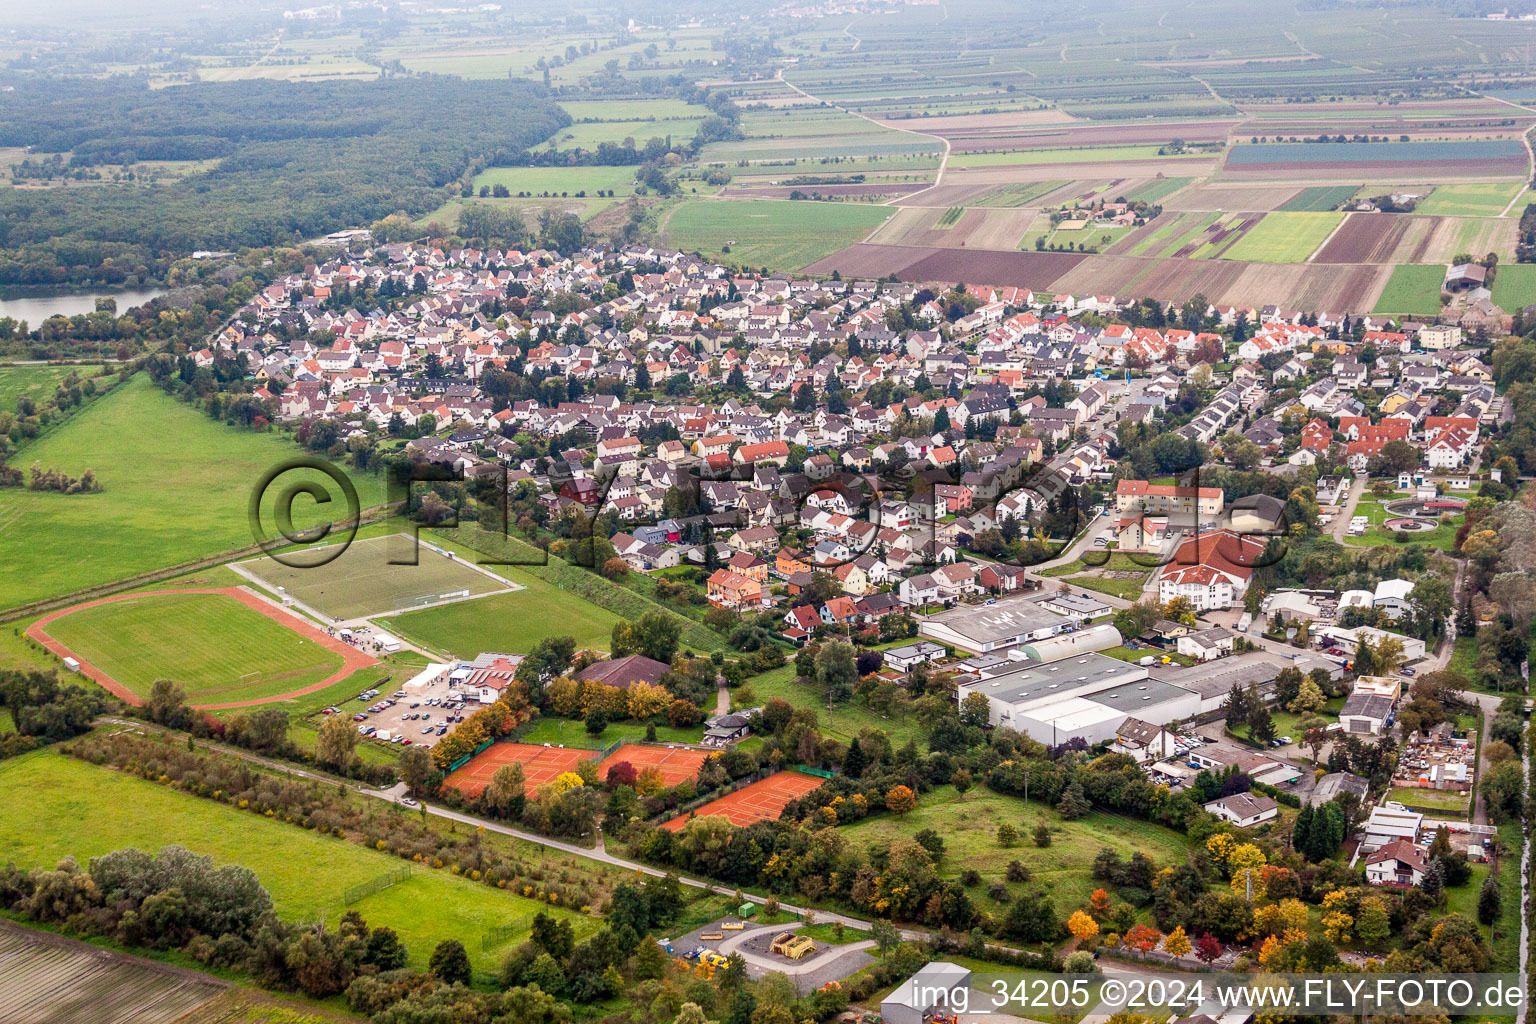 Village - view on the edge of agricultural fields and farmland in Lambsheim in the state Rhineland-Palatinate, Germany